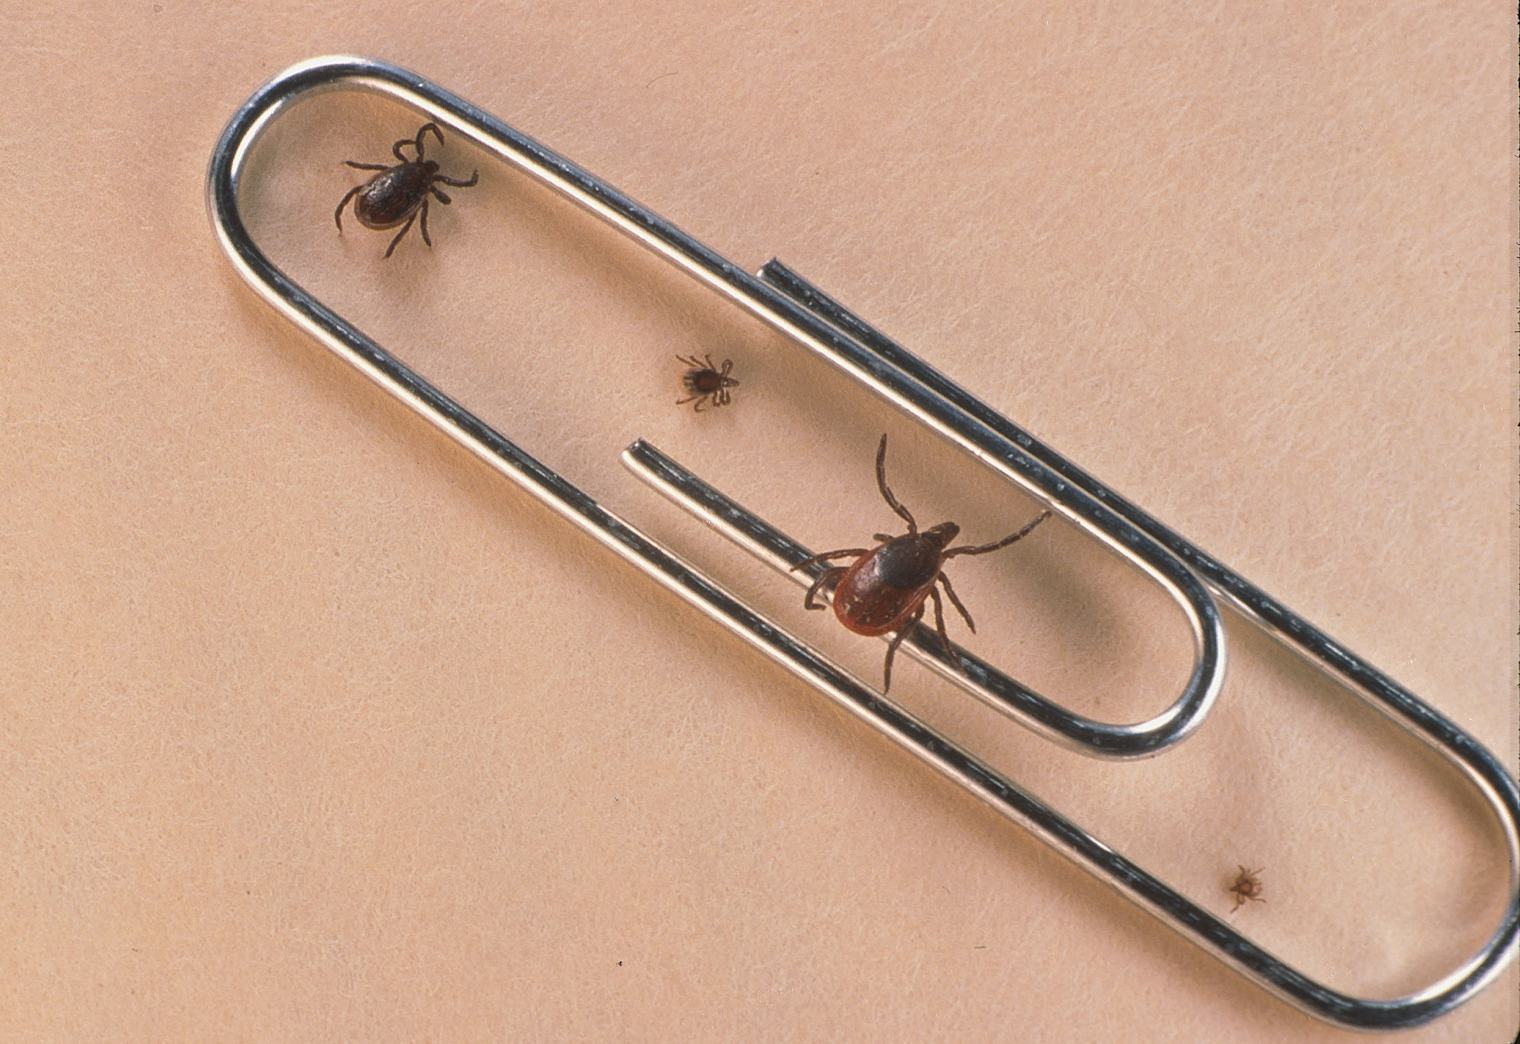 What Are Seed Ticks Parents Should Be On The Lookout This Summer